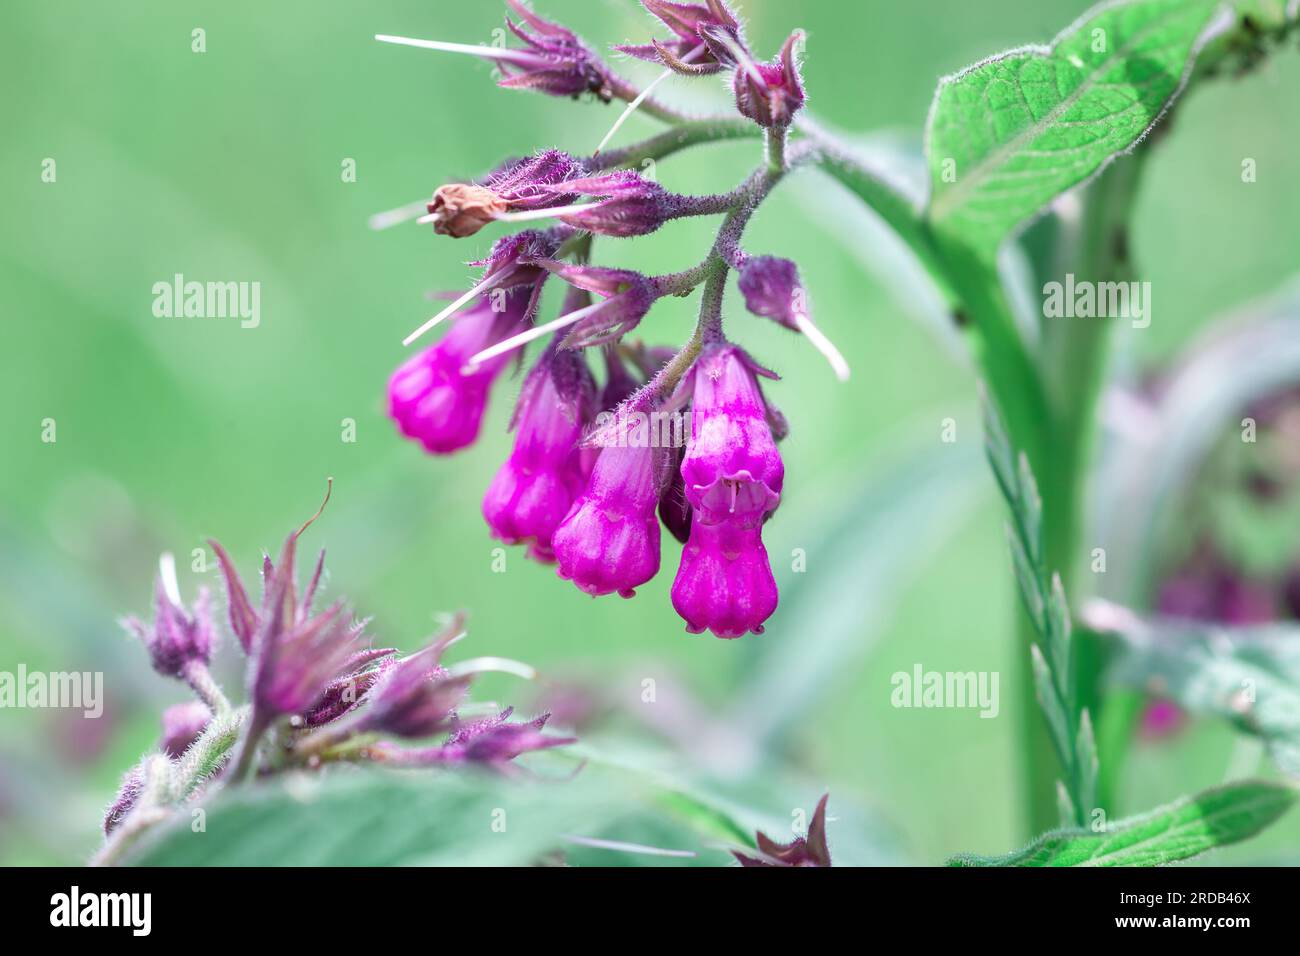 Comfrey pink flowers growth in summer light garden. Purple Symphytum officinale perennial flowering plants grow in spring green meadow. Bright fresh w Stock Photo